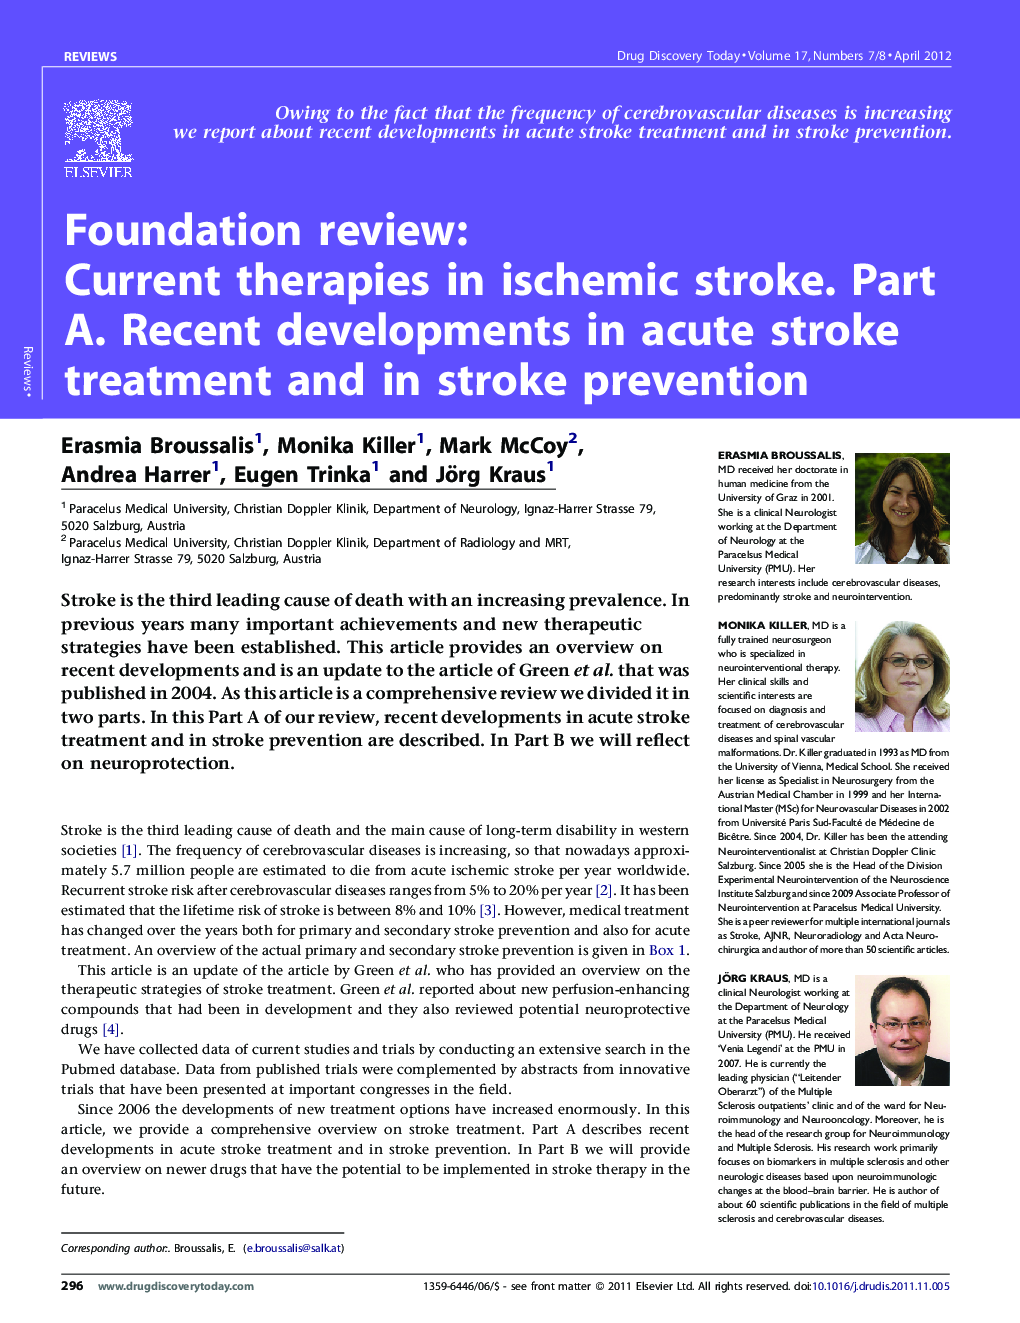 Current therapies in ischemic stroke. Part A. Recent developments in acute stroke treatment and in stroke prevention